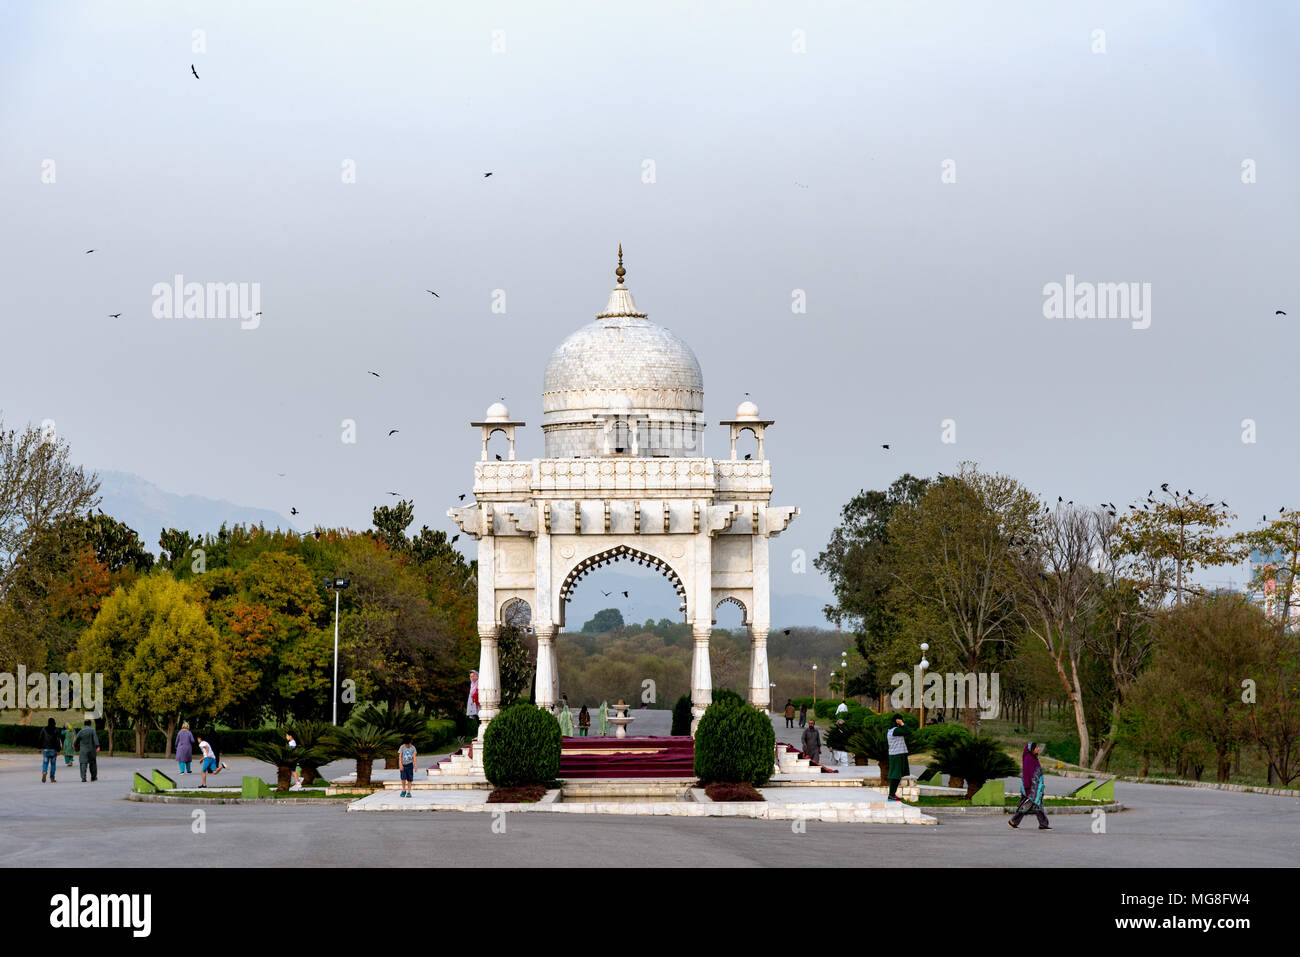 Fatima Jinnah Park, also known as Capital Park or F-9 Park, is a public recreational park situated within the F-9 sector of Islamabad, Stock Photo